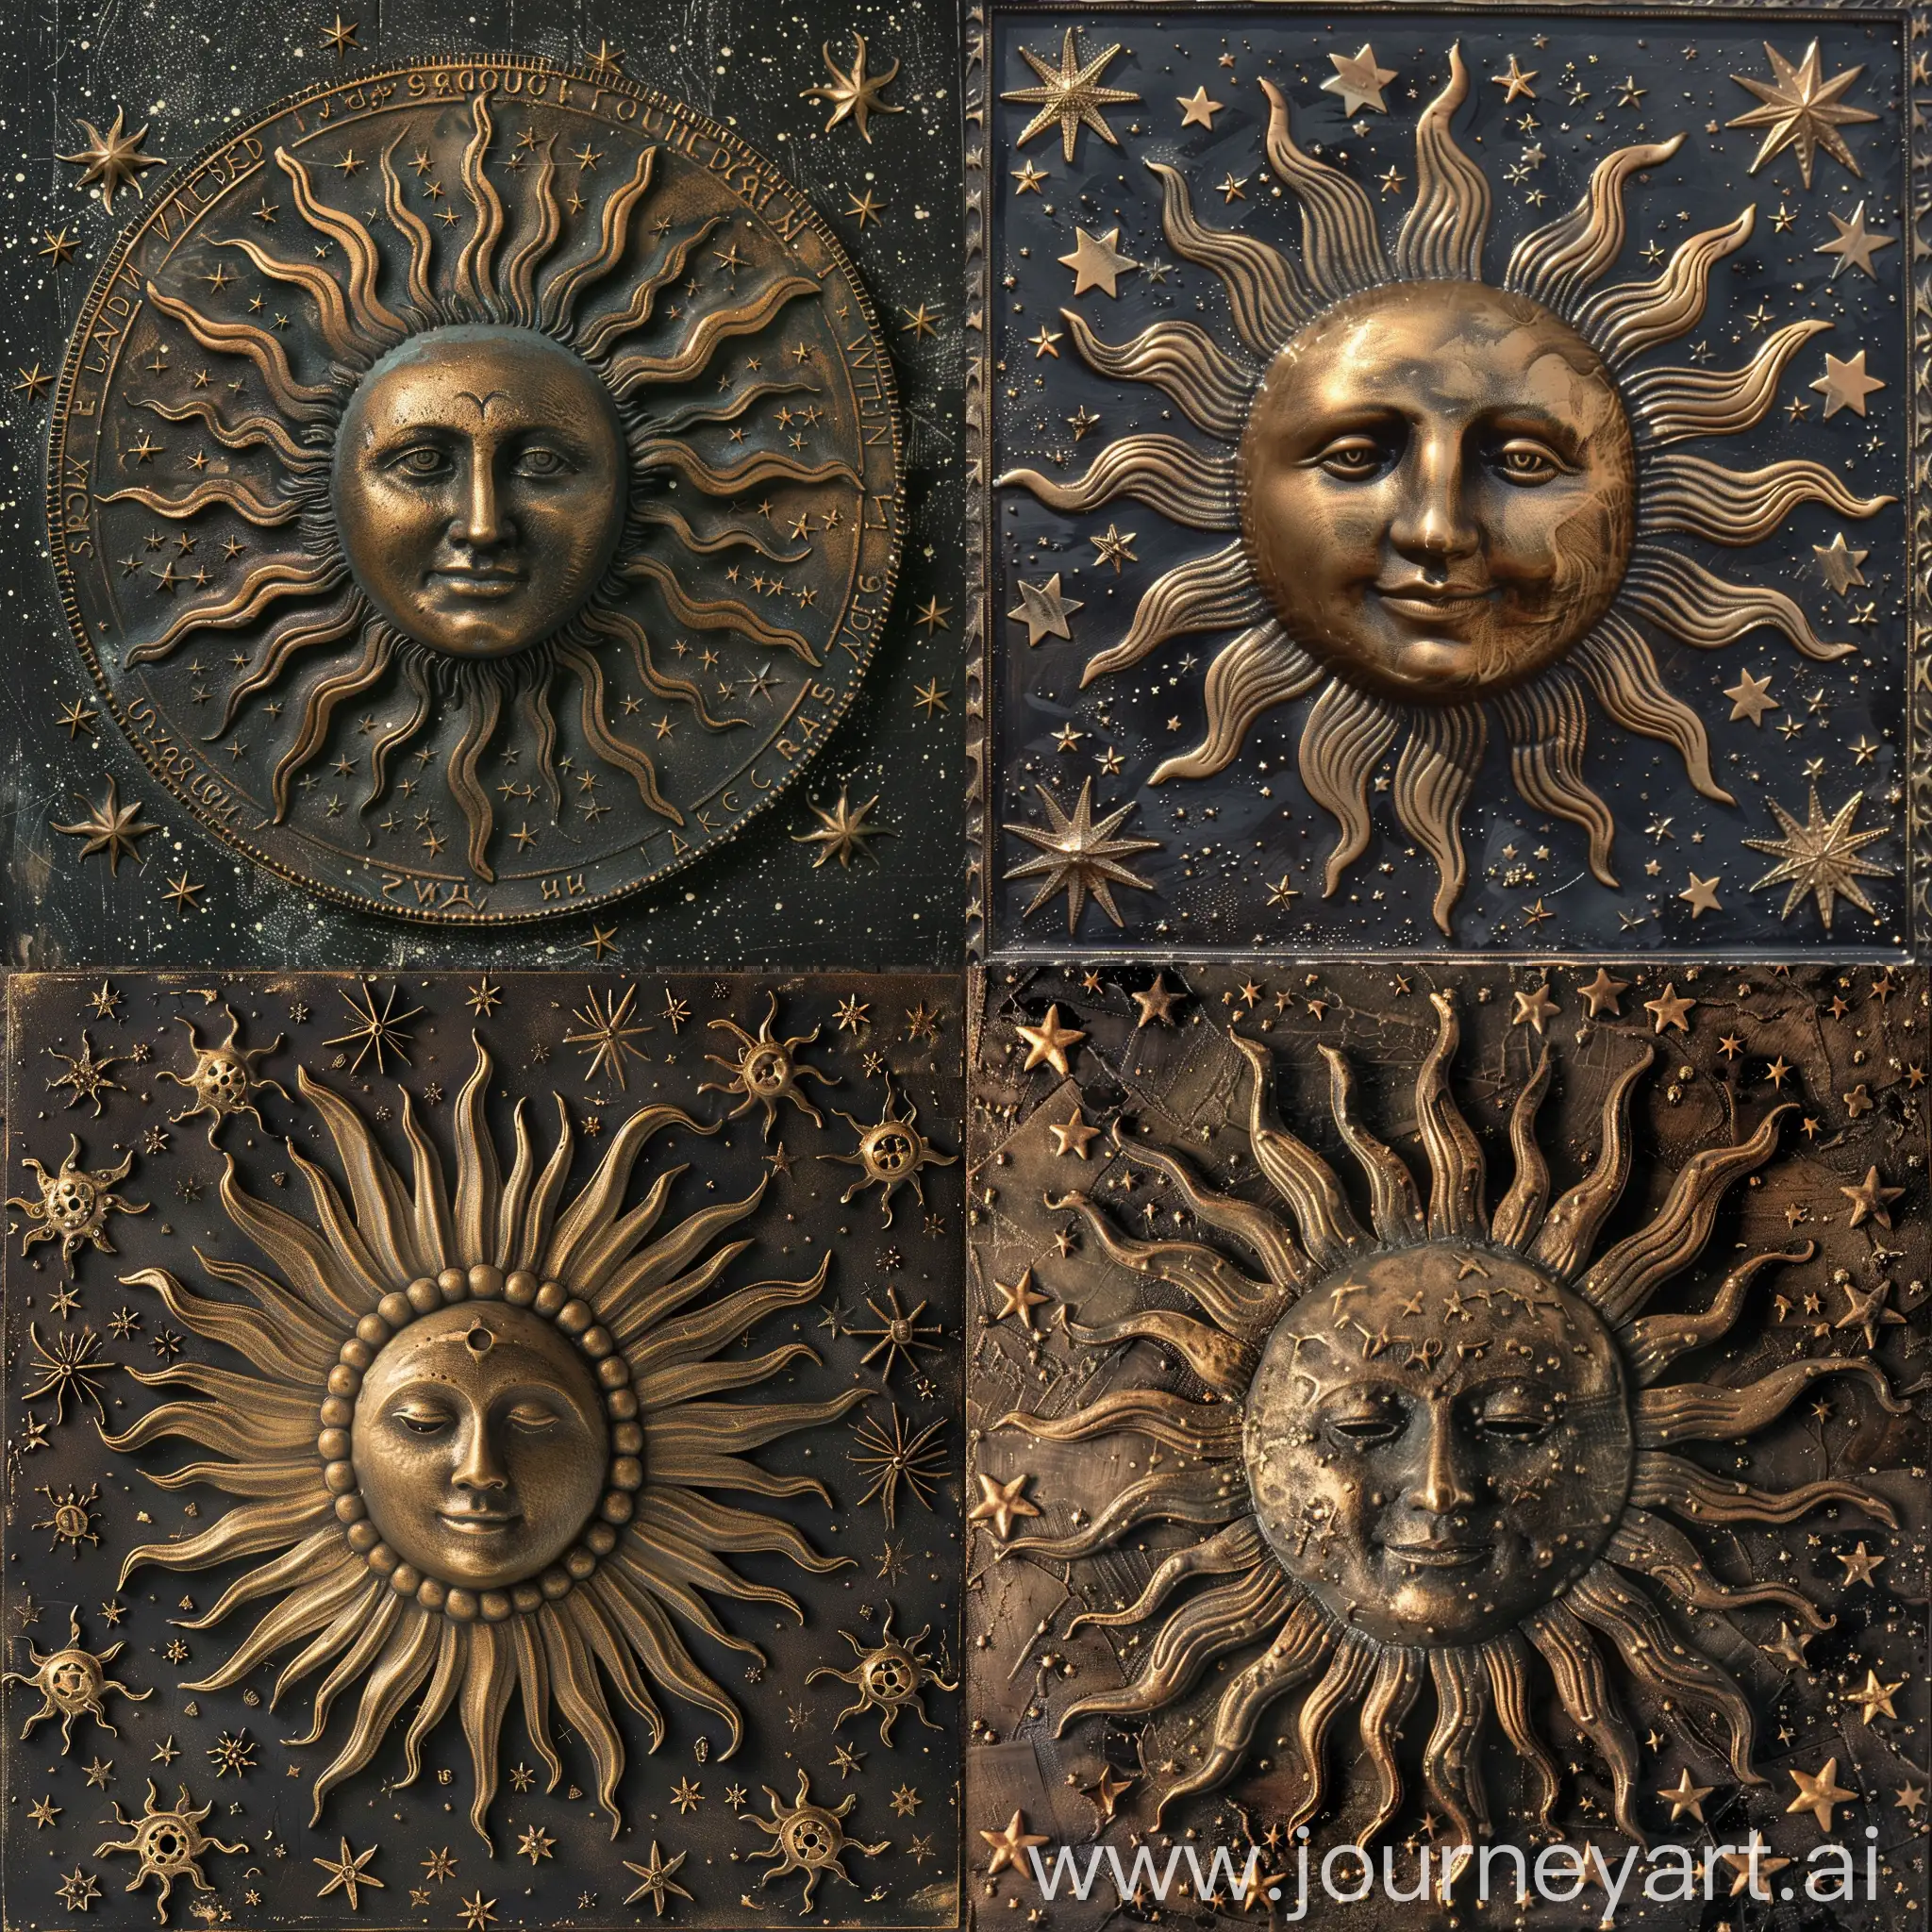 Bronze-Pagan-Sun-in-Starry-Cosmos-HighQuality-Professional-Photo-with-Intricate-Details